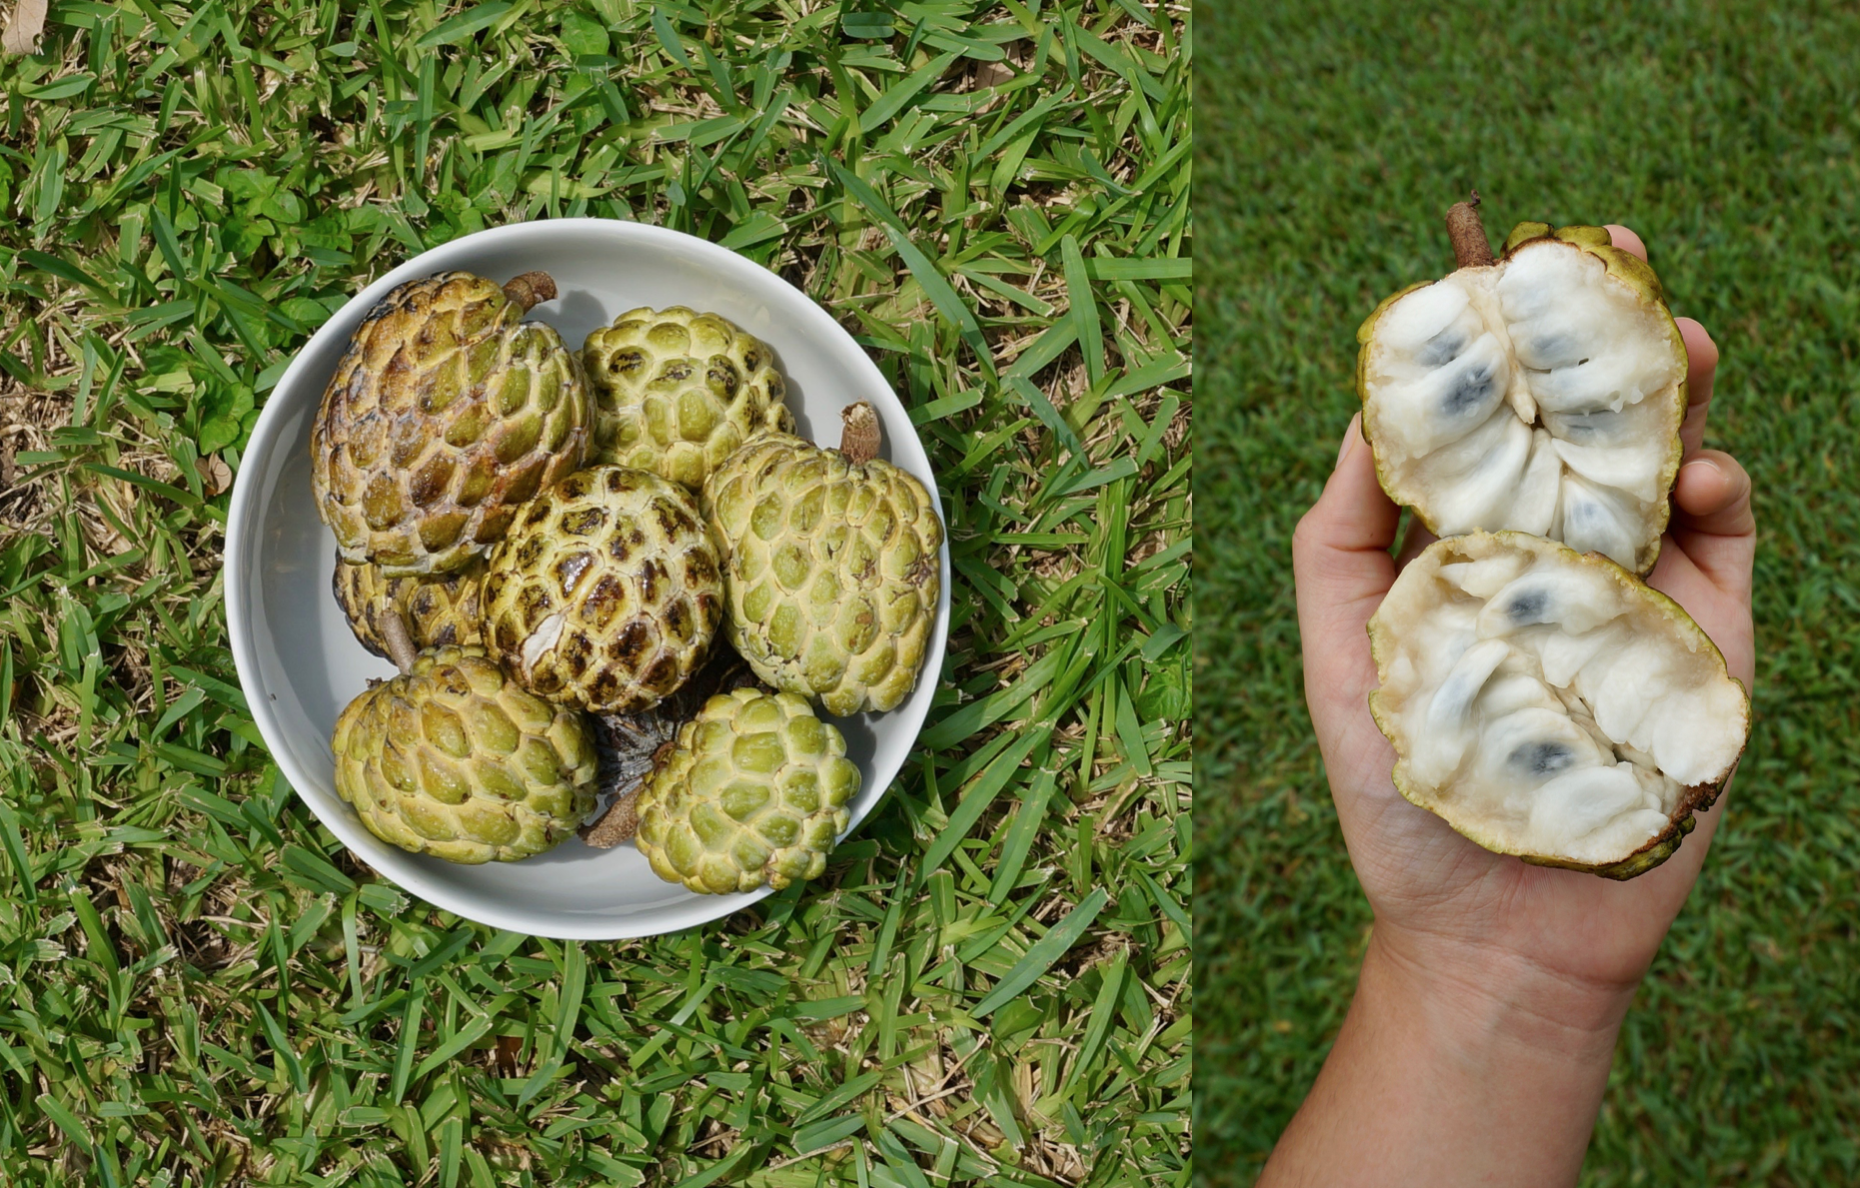 Ripe sugar apples in a bowl and one opened sugar apple in hand.